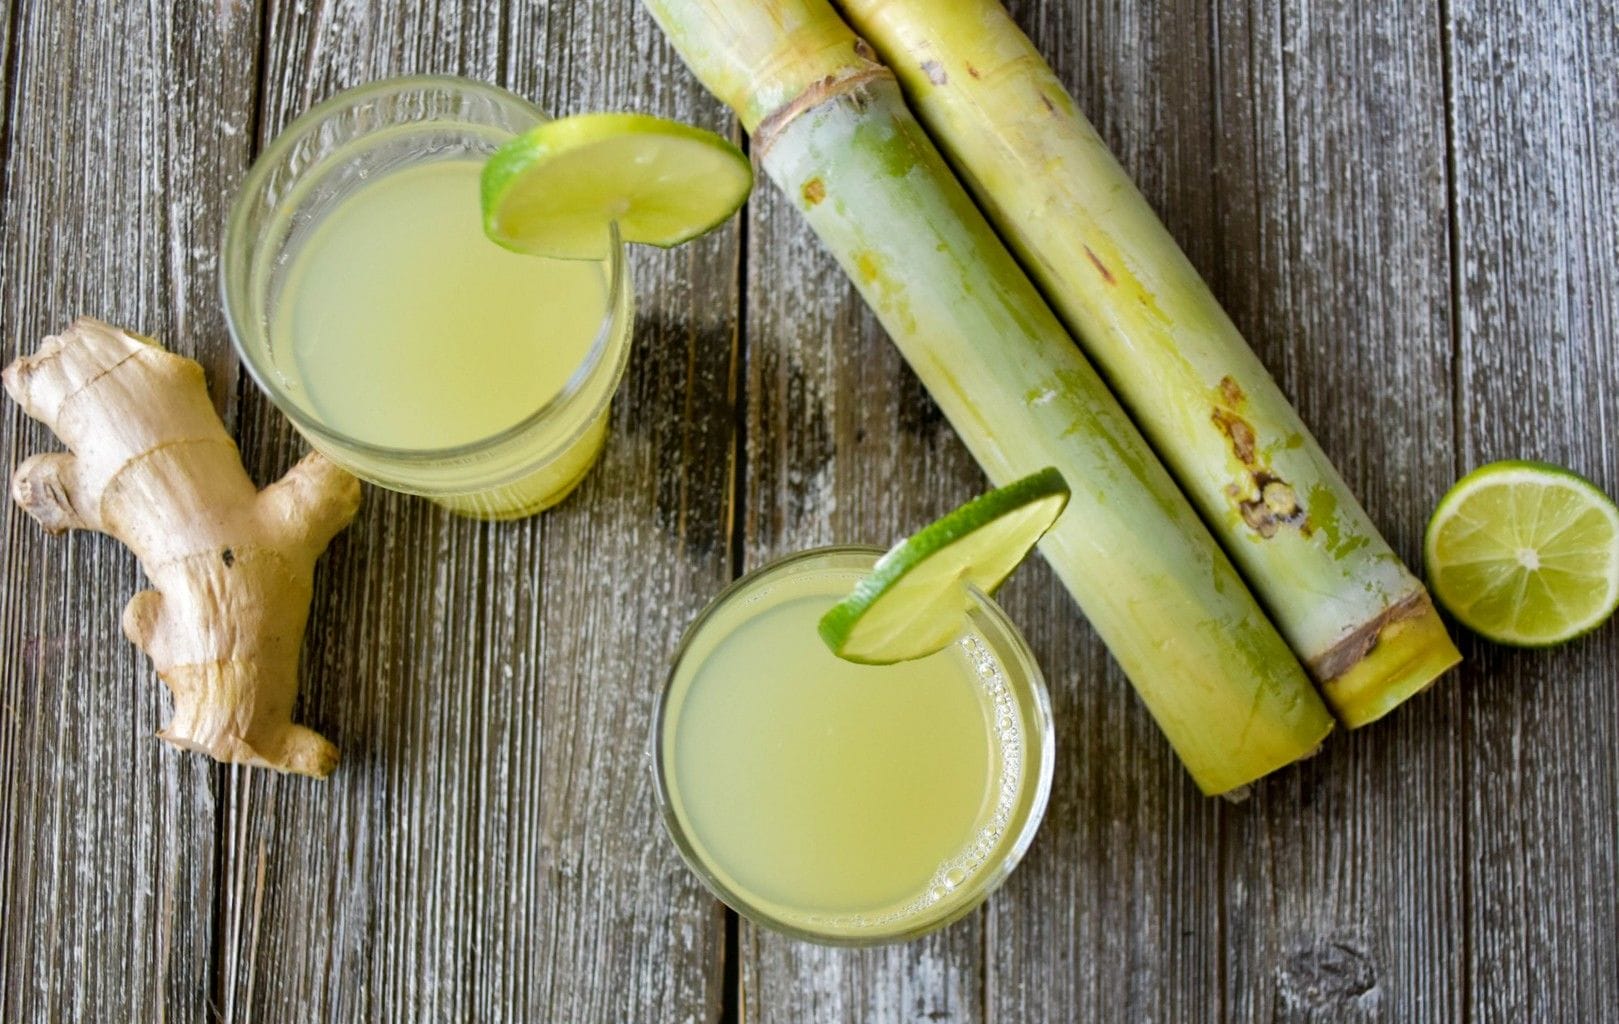 Know these 10 benefits to the body by drinking sugarcane juice in the summer season